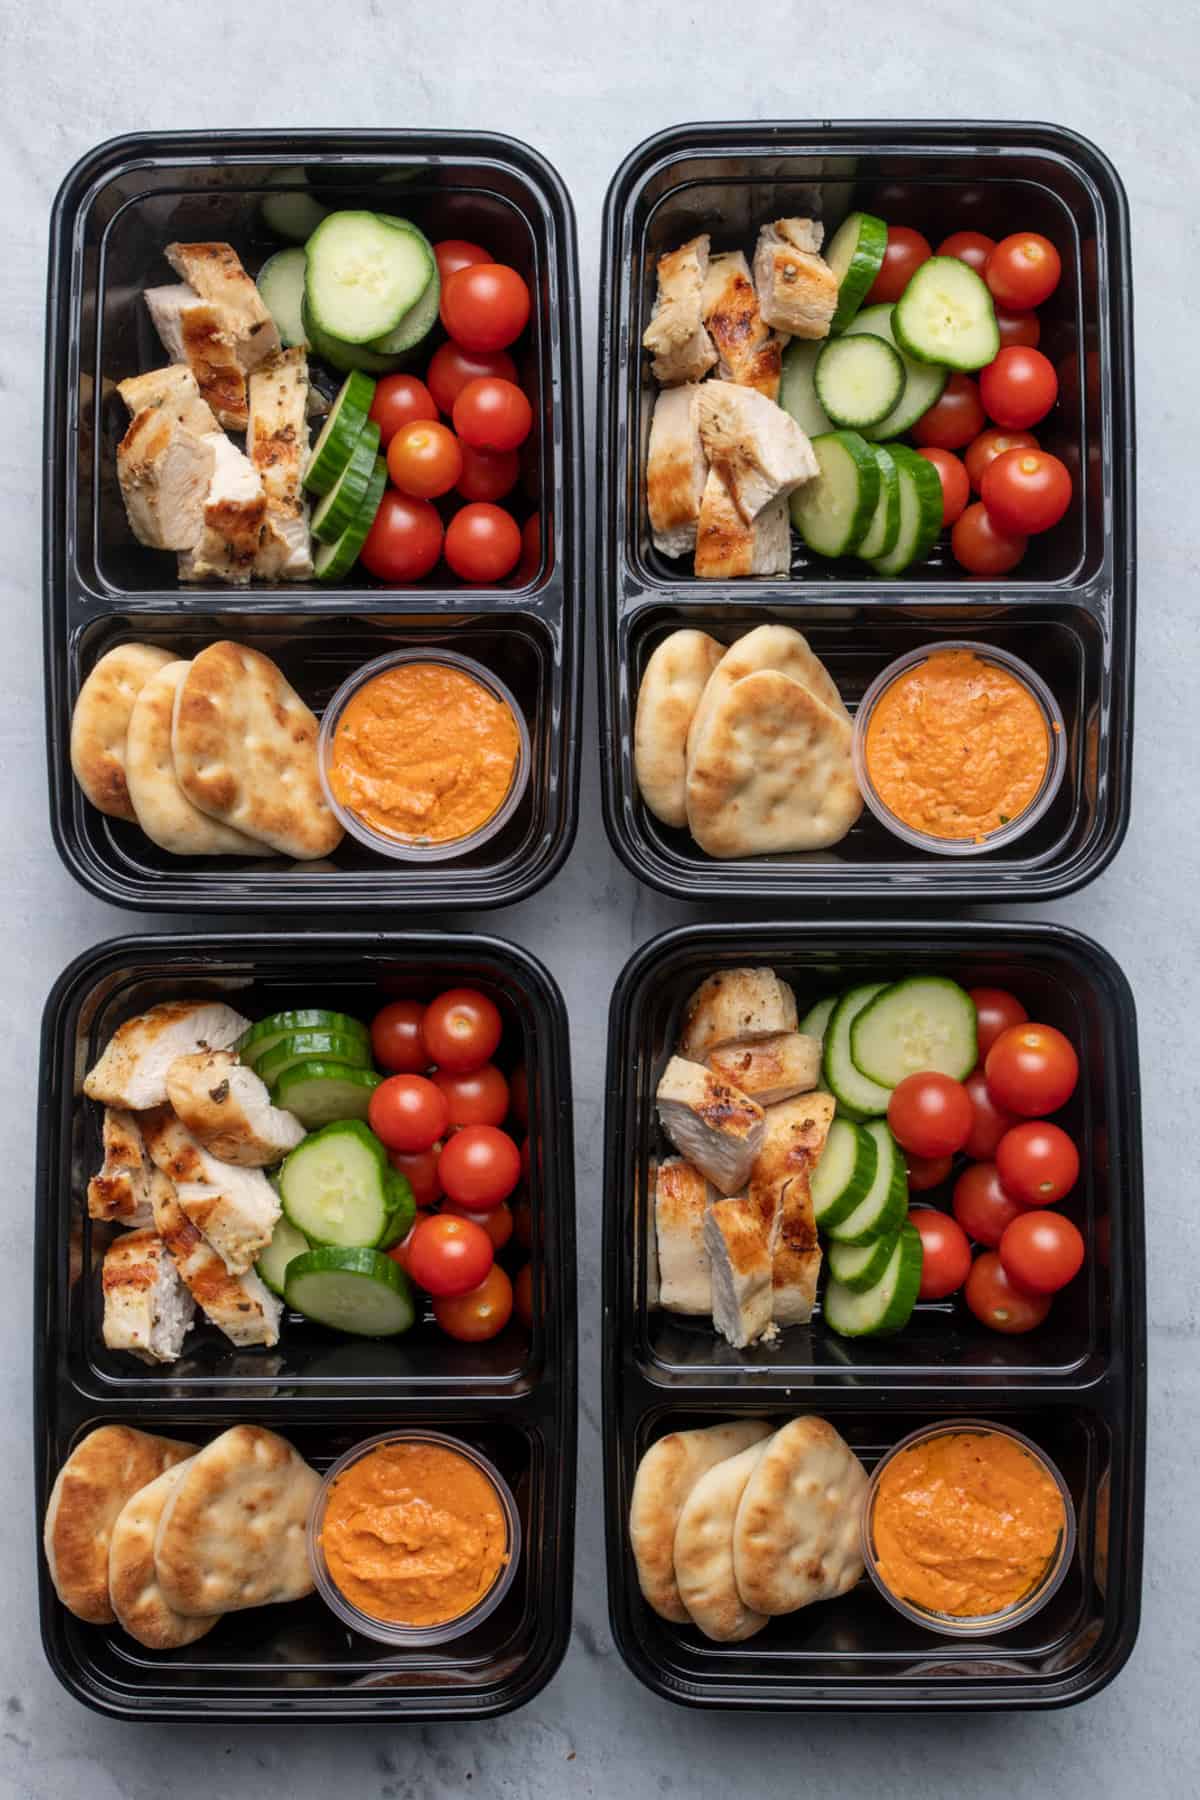 https://feelgoodfoodie.net/wp-content/uploads/2021/09/Grilled-Chicken-_-Hummus-Meal-Prep-11.jpg